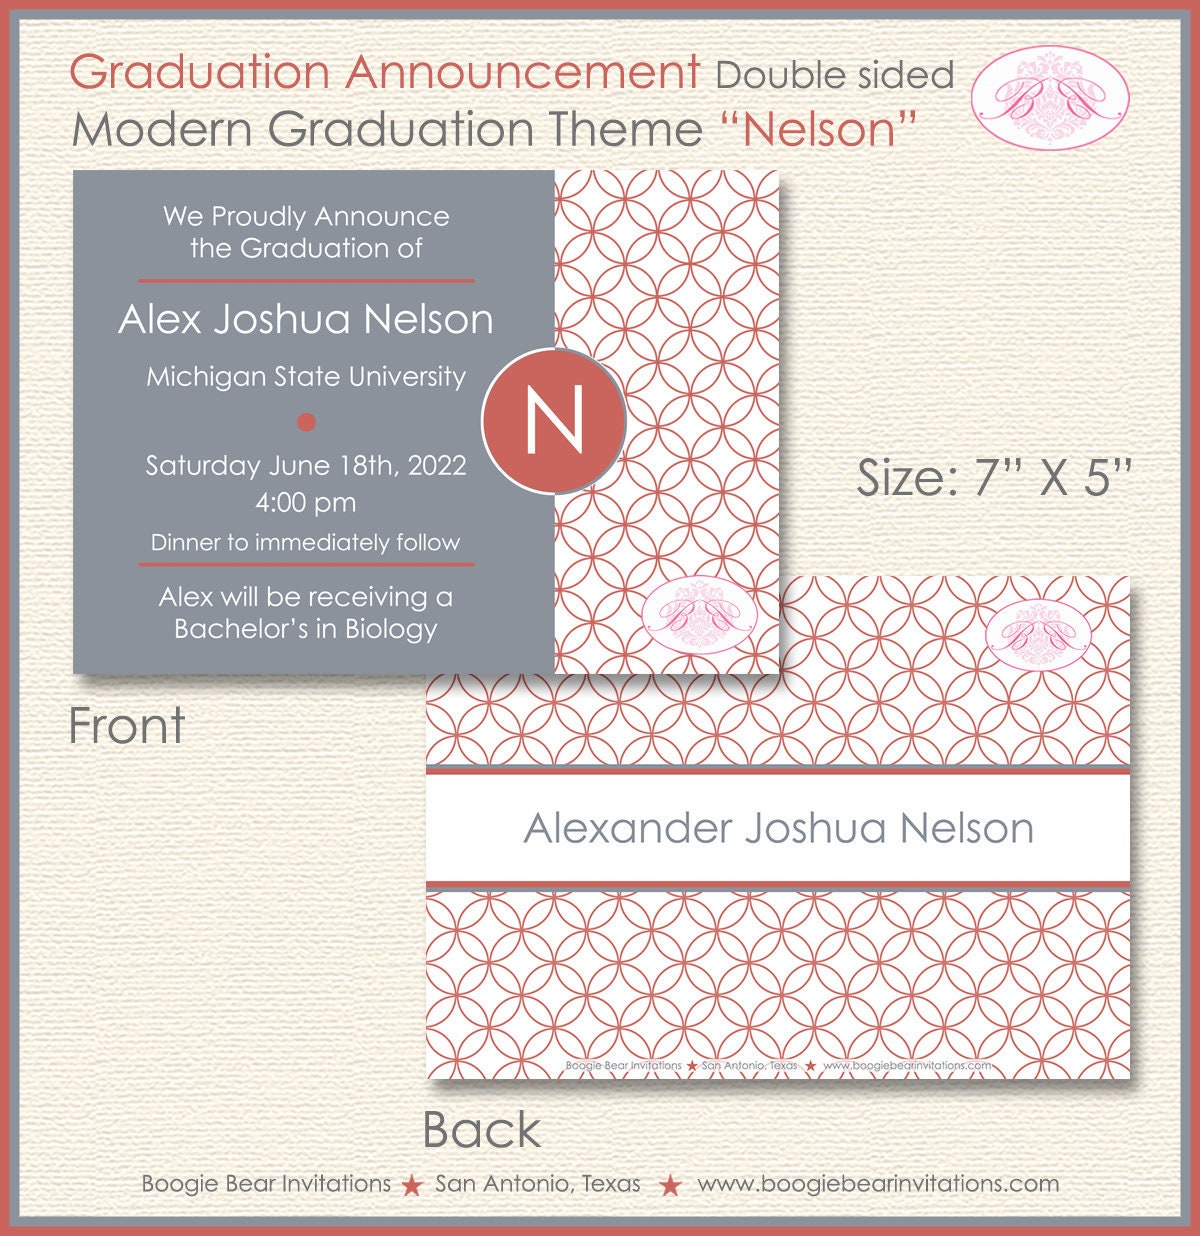 Modern Circles Graduation Announcement Grey Red White 2022 2023 2024 2025 Boogie Bear Invitations Nelson Theme Paperless Printable Printed